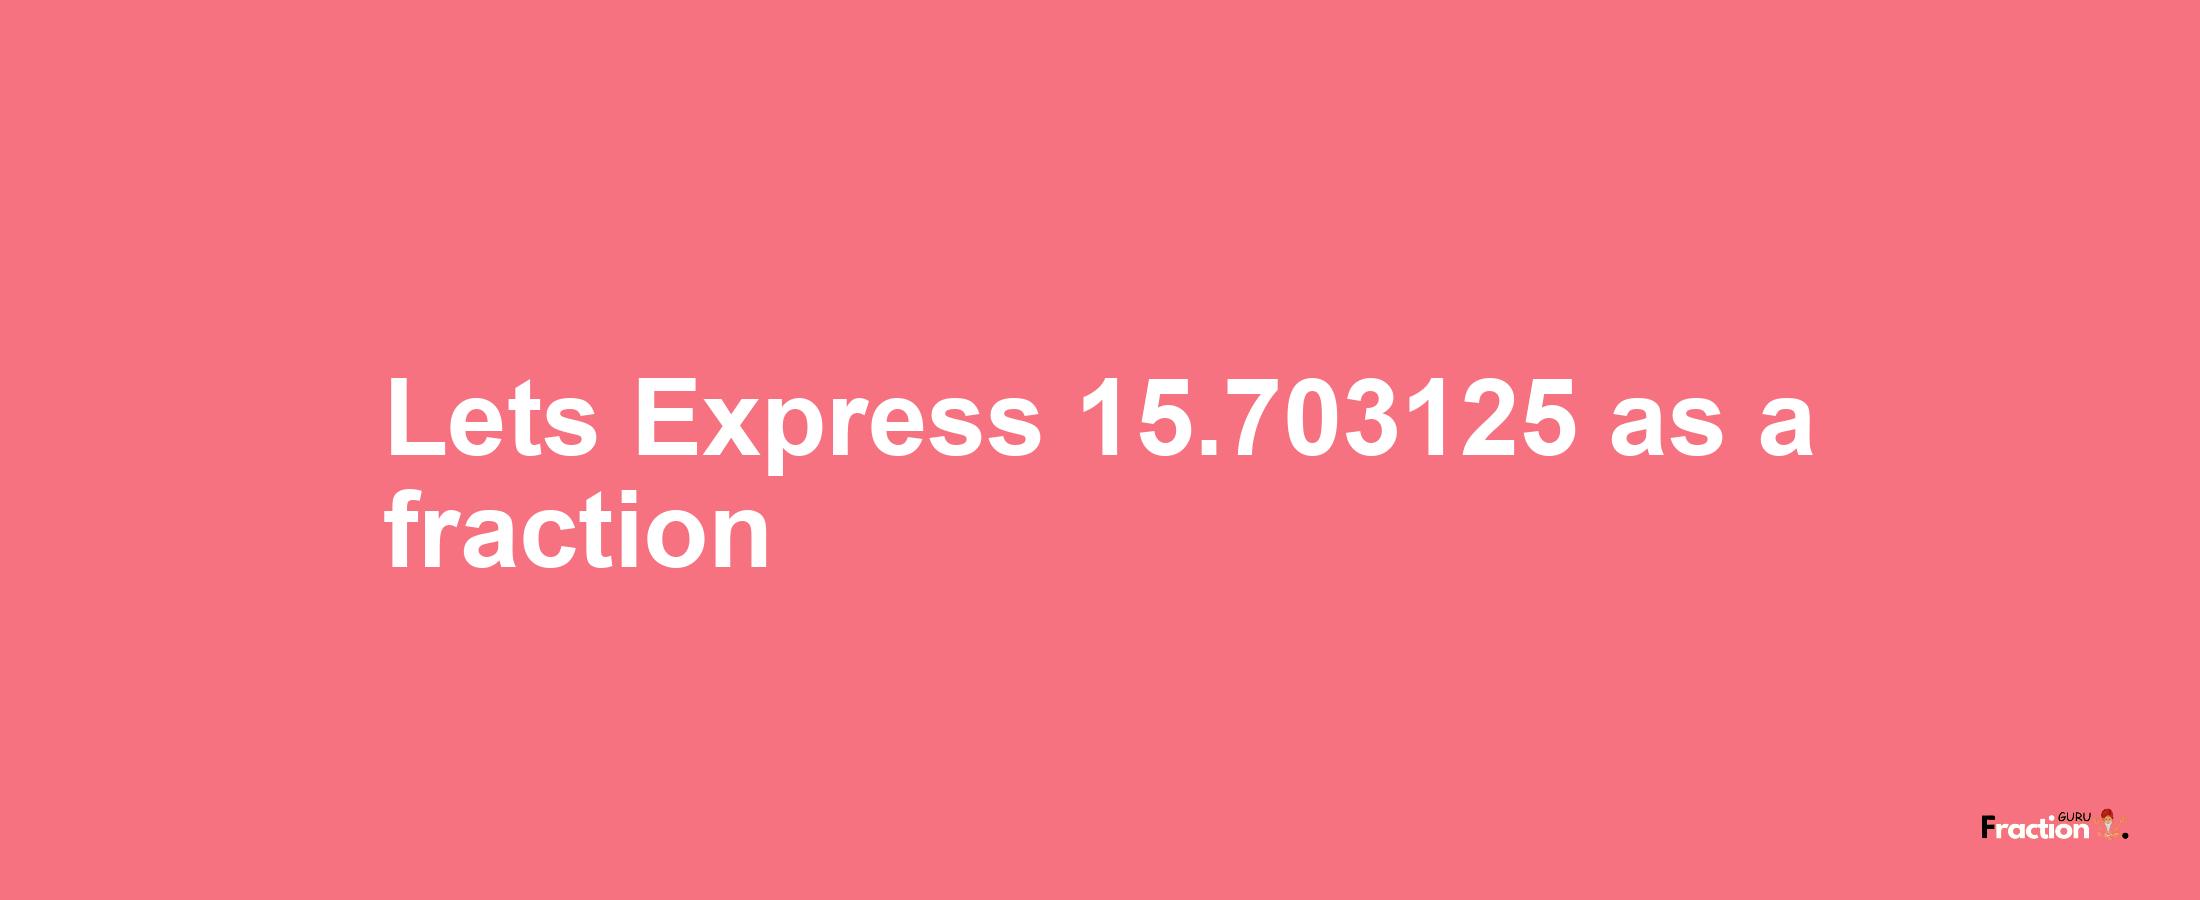 Lets Express 15.703125 as afraction